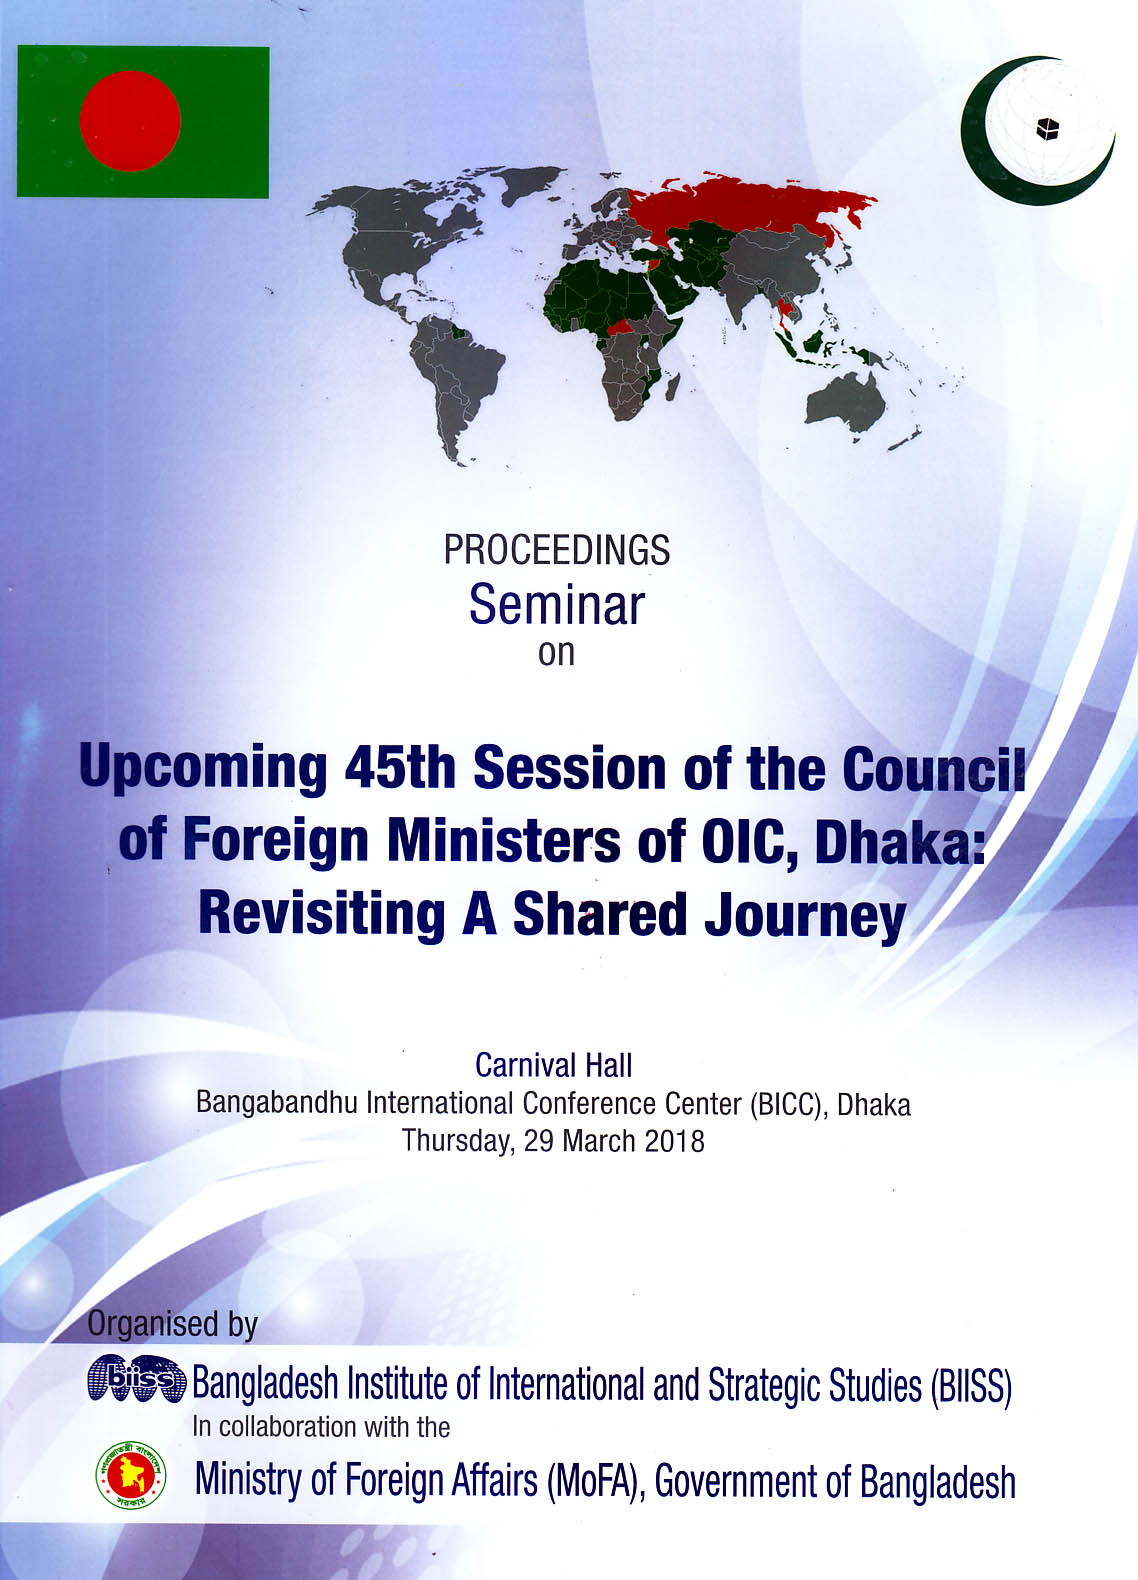 Seminar Proceedings Upcoming 45th Session of the Council of Foreign Ministers of OIC, Dhaka: revisiting a shared journey